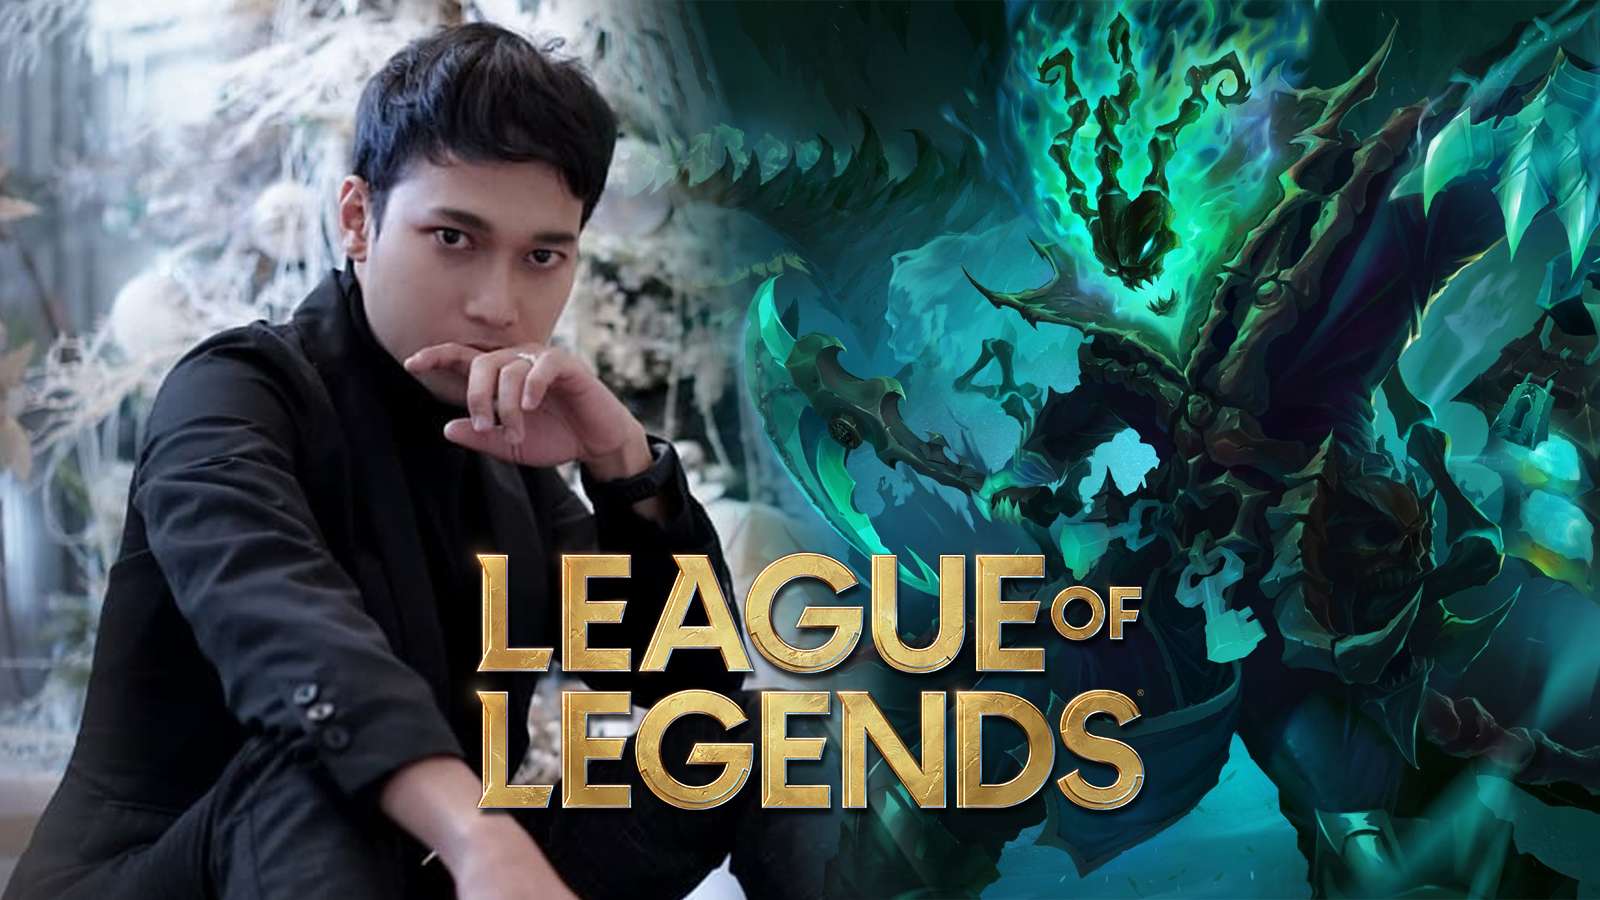 Thresh cosplay in League of Legends